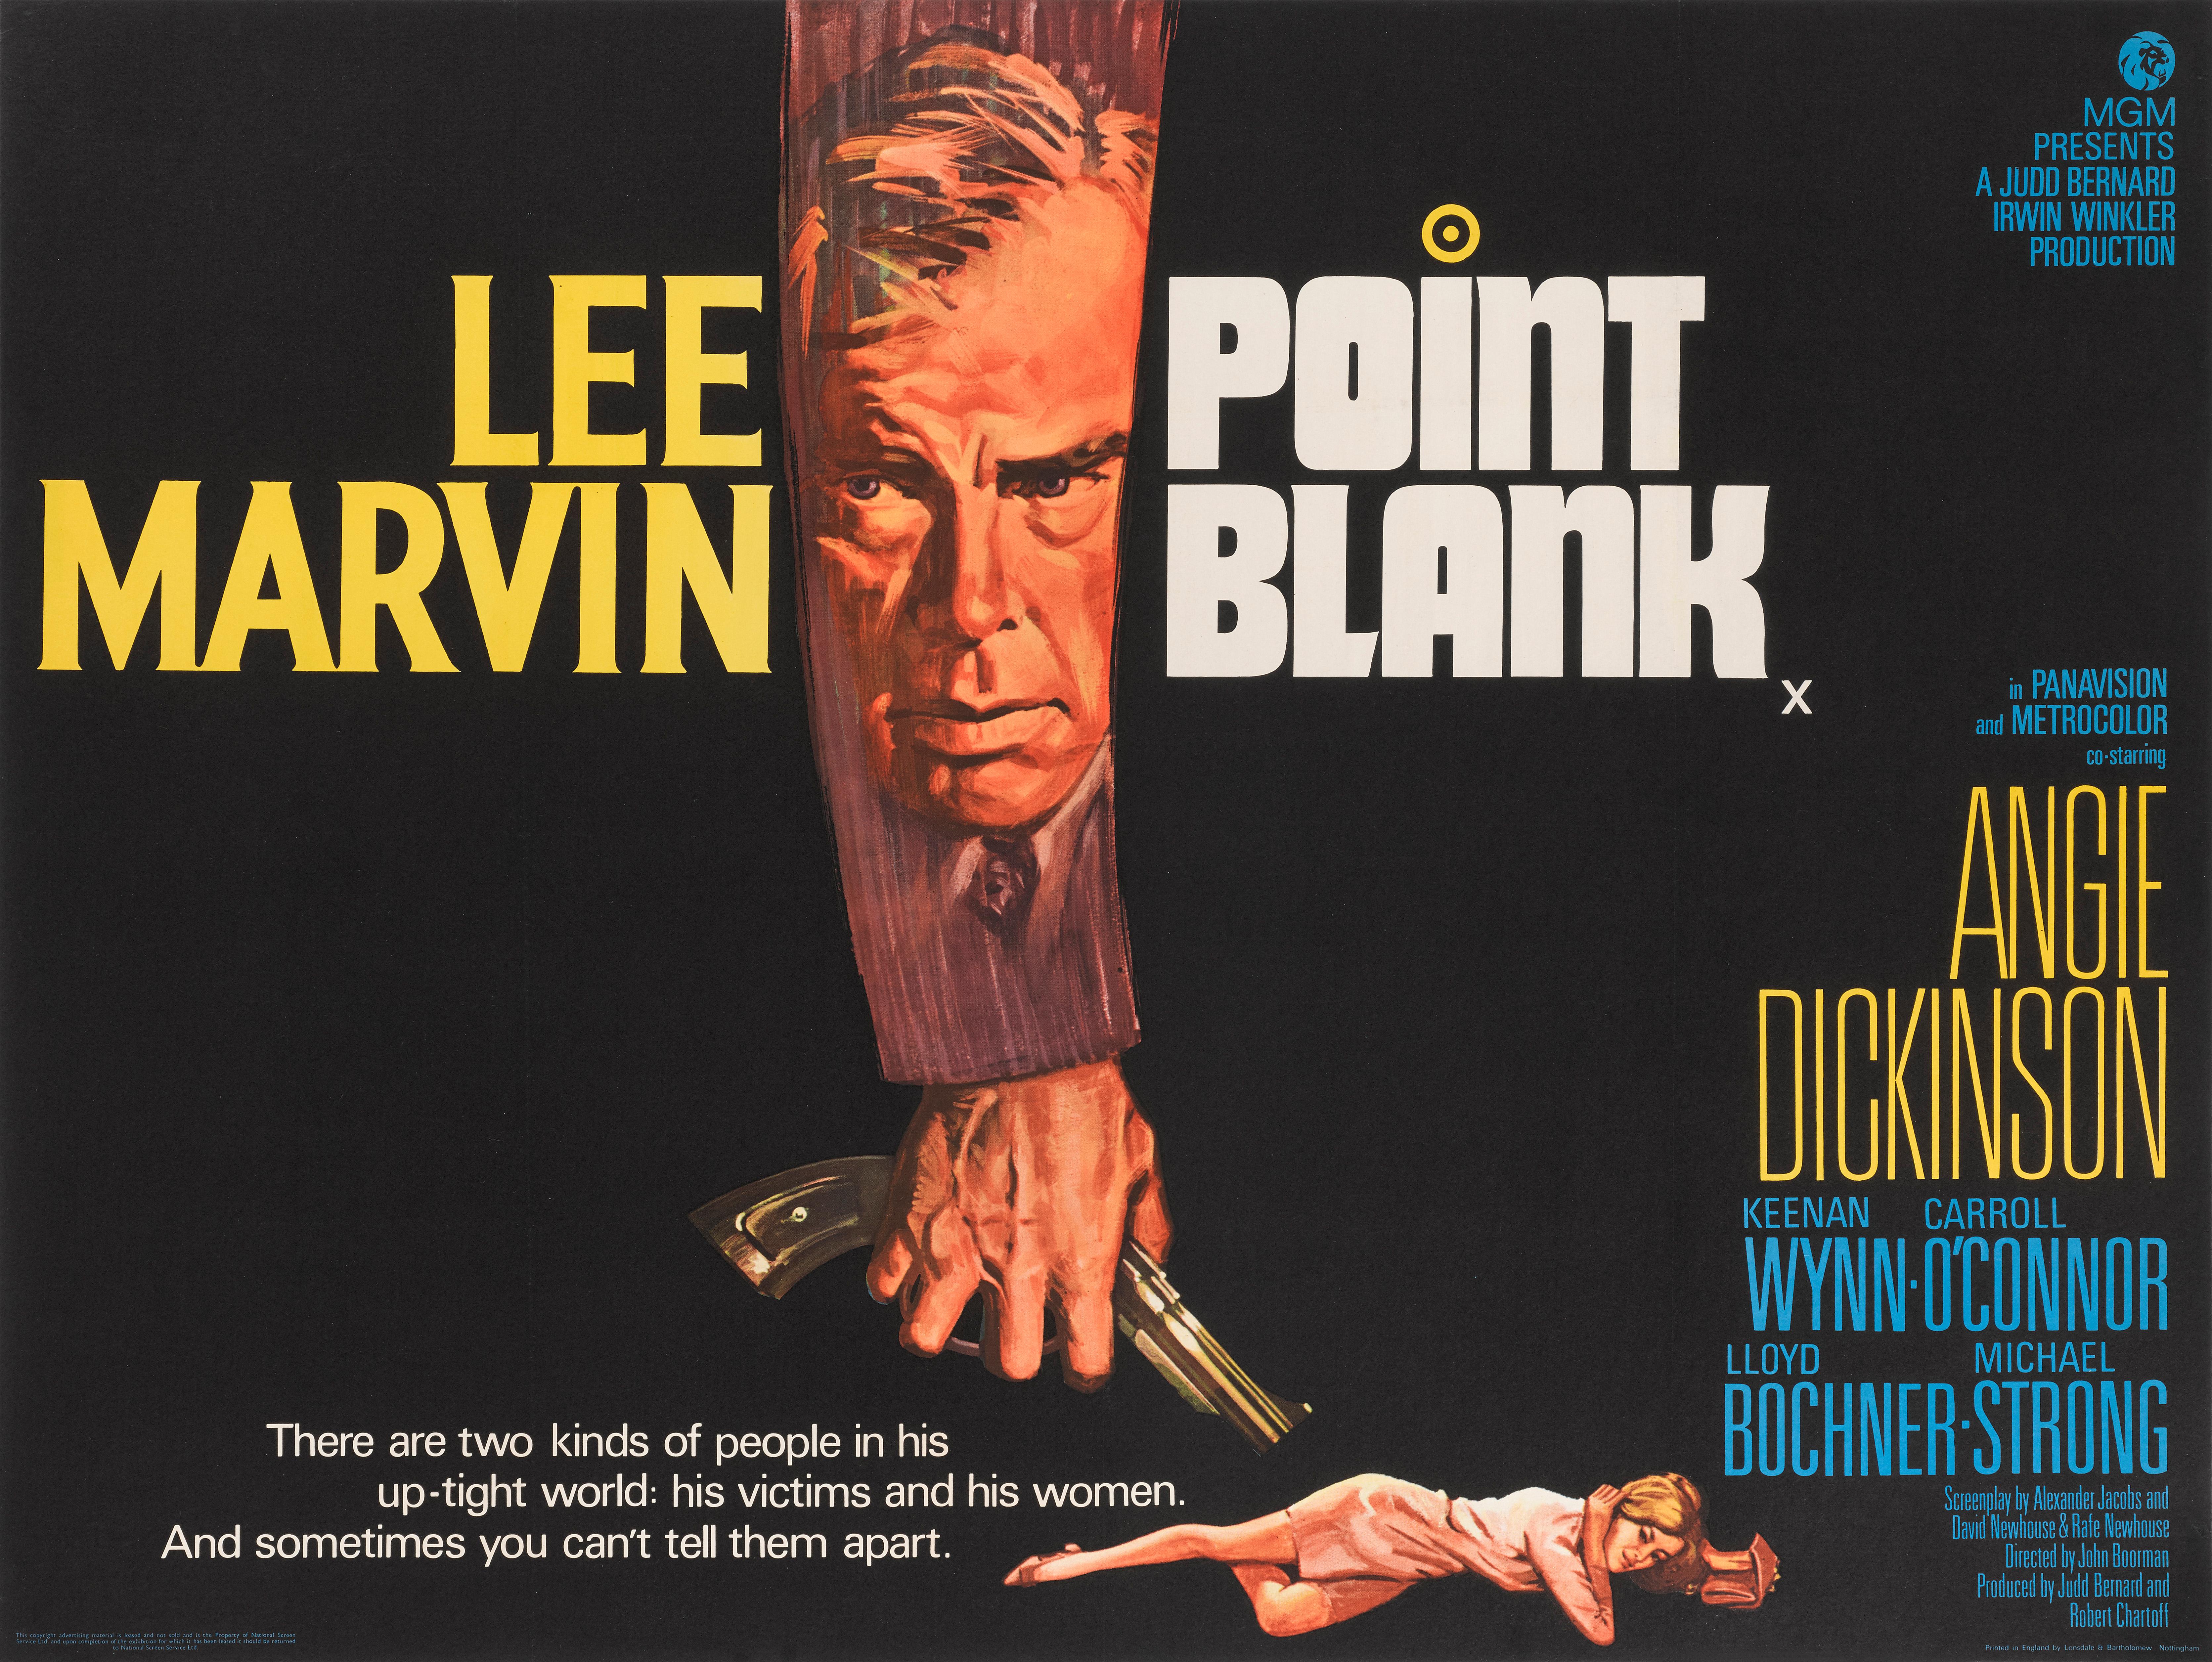 Original British film poster for 1967 film Point Blank. The film was directed by John Boorman at Lee Marvin's request, and stars Marvin, Angie Dickinson and Keenan Wynn. This film was not a box-office success at the time of release, but has gone on